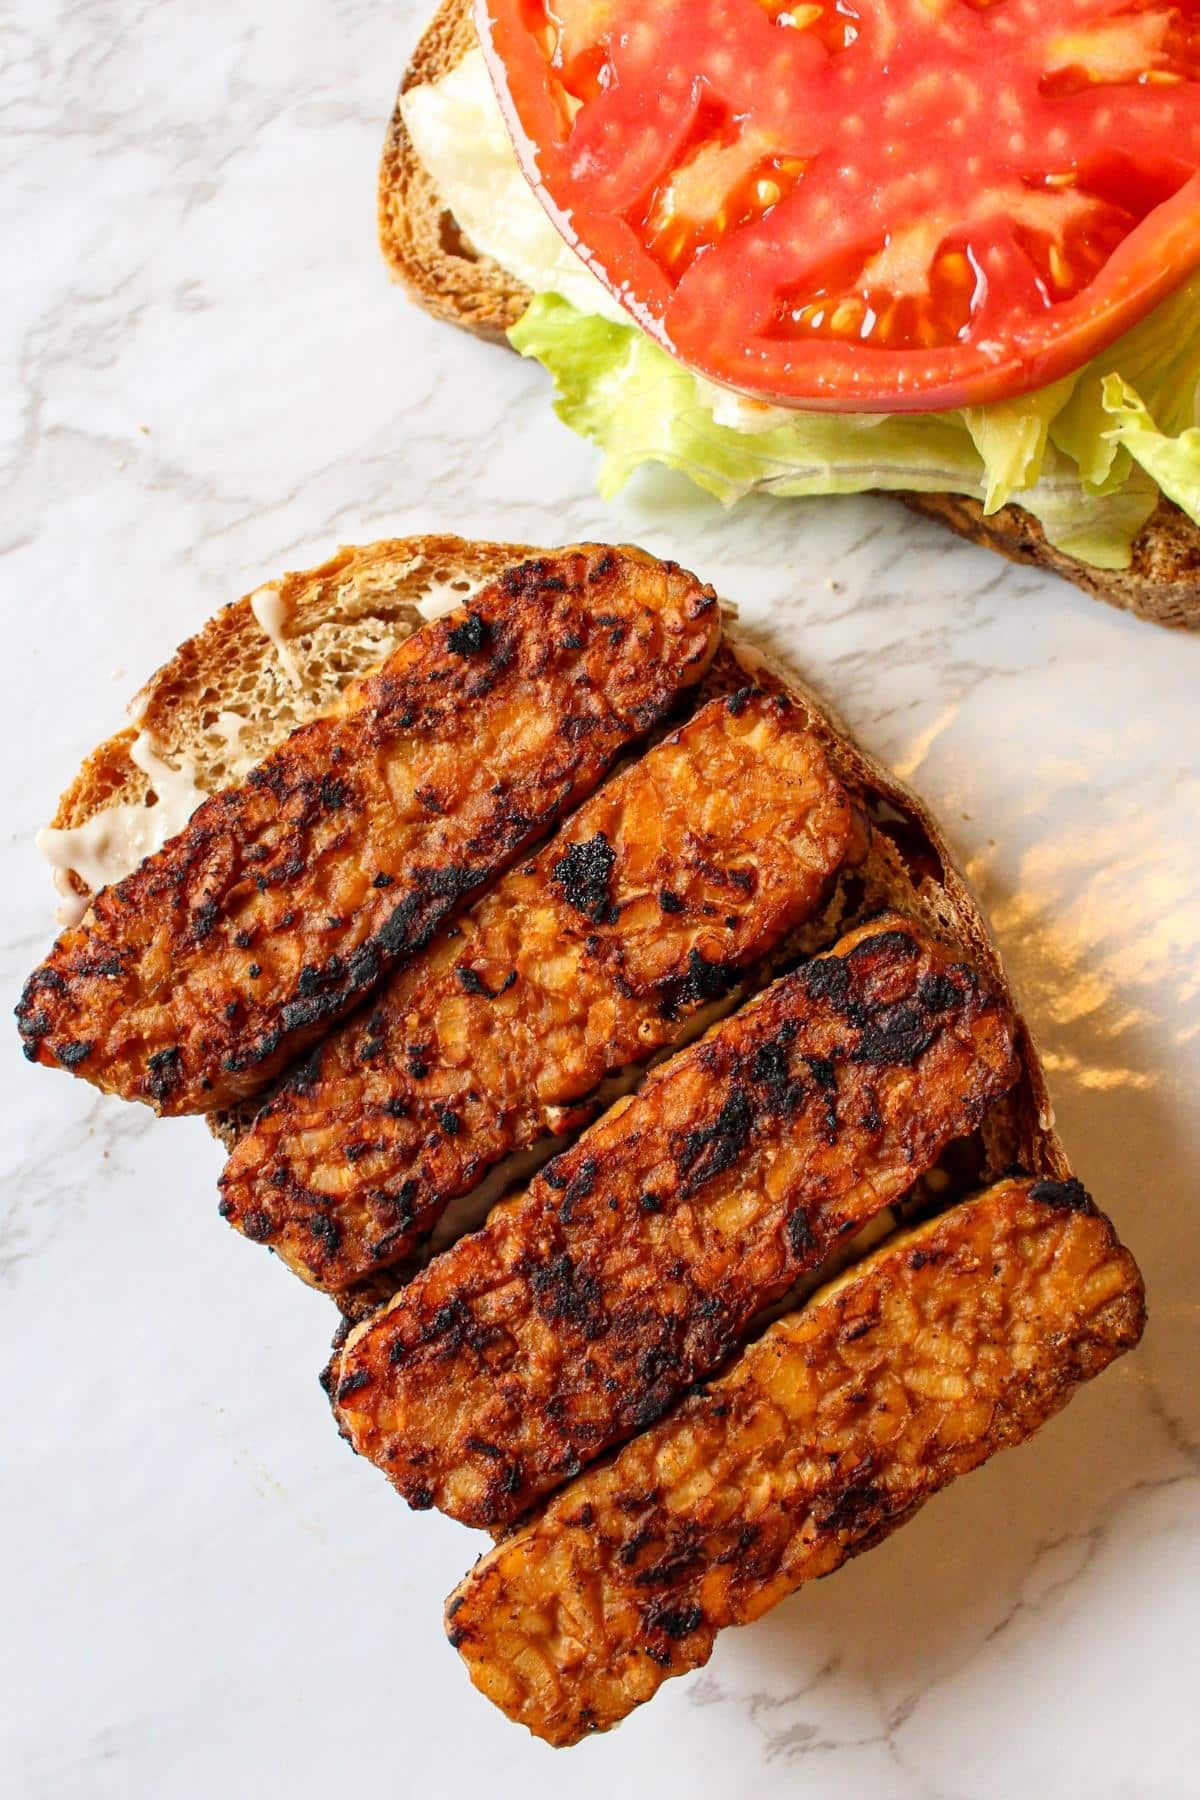 Smoky tempeh on a piece of bread